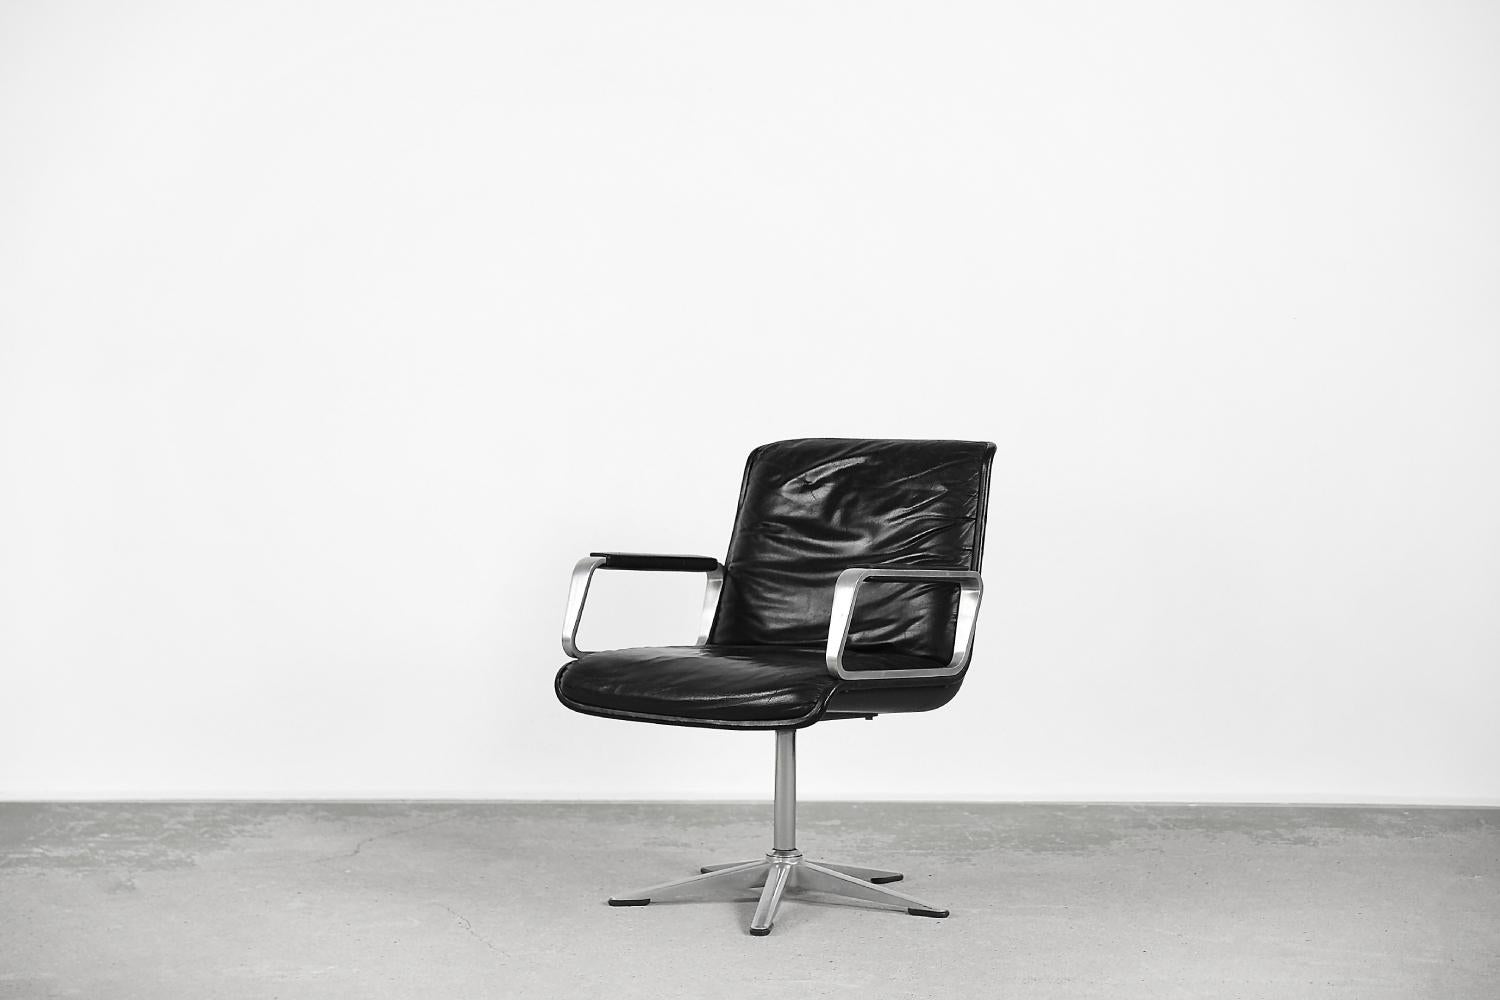 This office chair was designed by Delta-Design, which included Michael Conrad, Henner Werner, Detlef Unger and Dieter Raffler in 1968. Delta-Design developed the 2000 series for Wilkhahn, which was a popular line of seats for discerning executives.